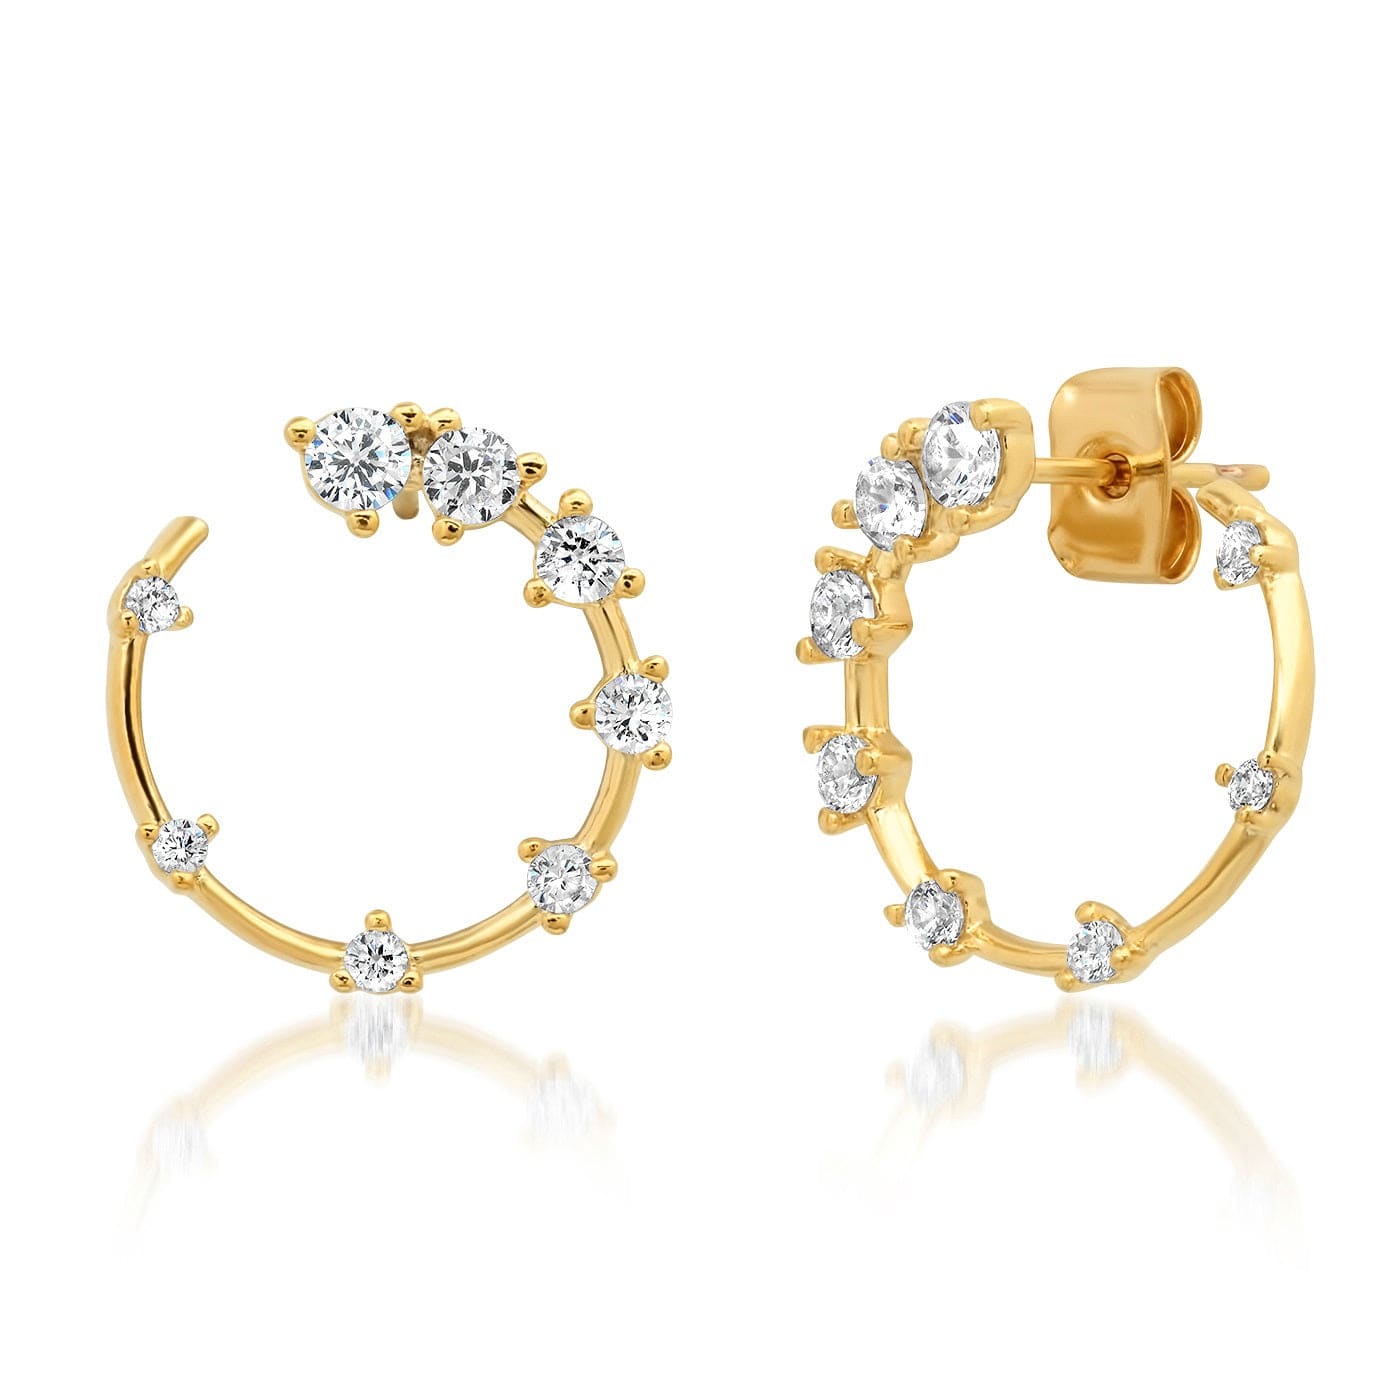 TAI JEWELRY Earrings Gold Front Facing Hoops With Scattered Cz Accents